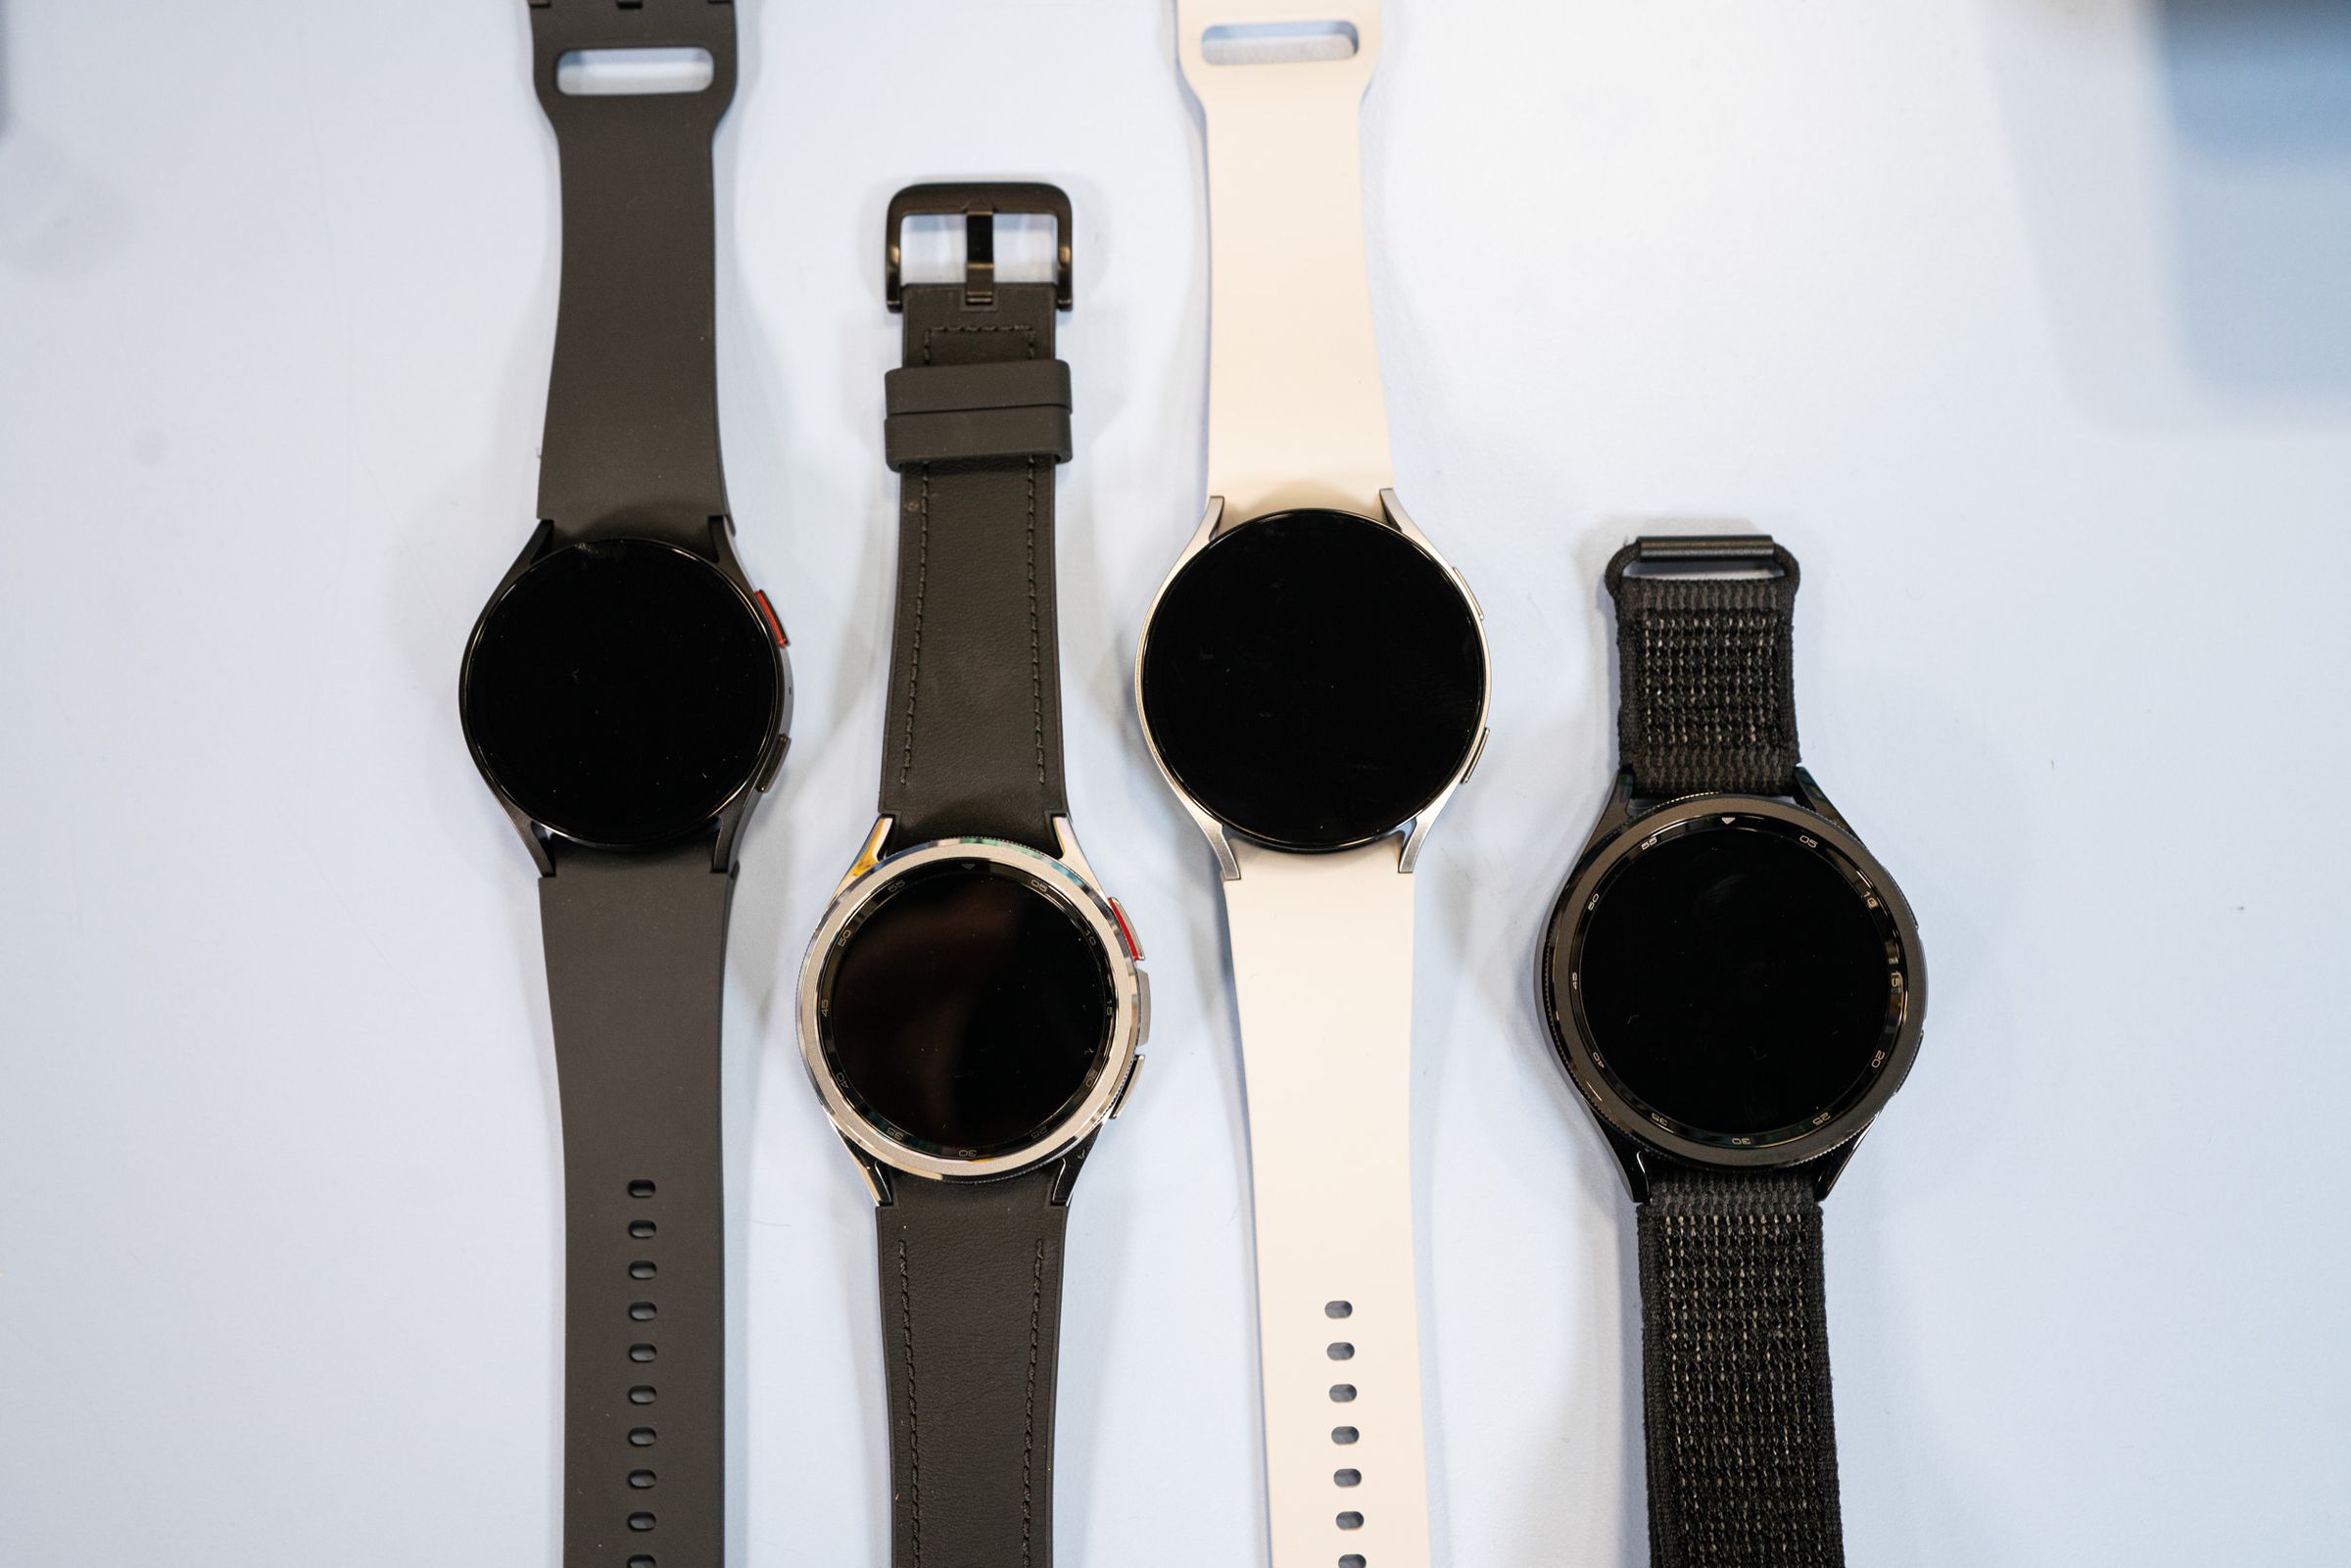 All four models of the Galaxy Watch 6 series in size ascending order.